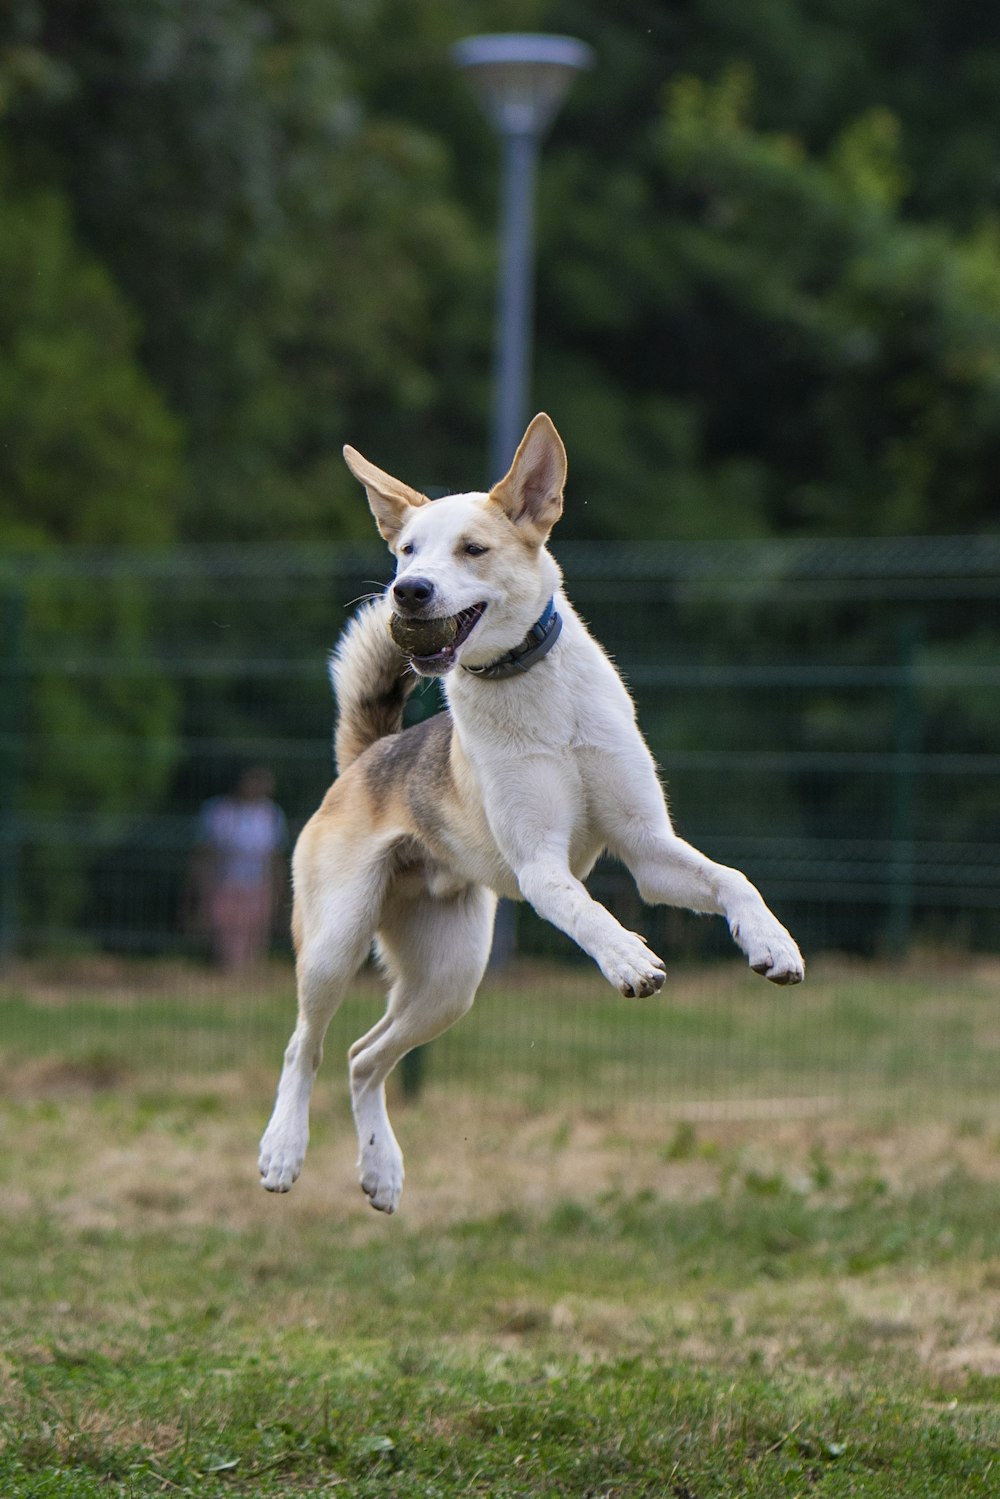 white and brown short coated dog running on brown grass field during daytime